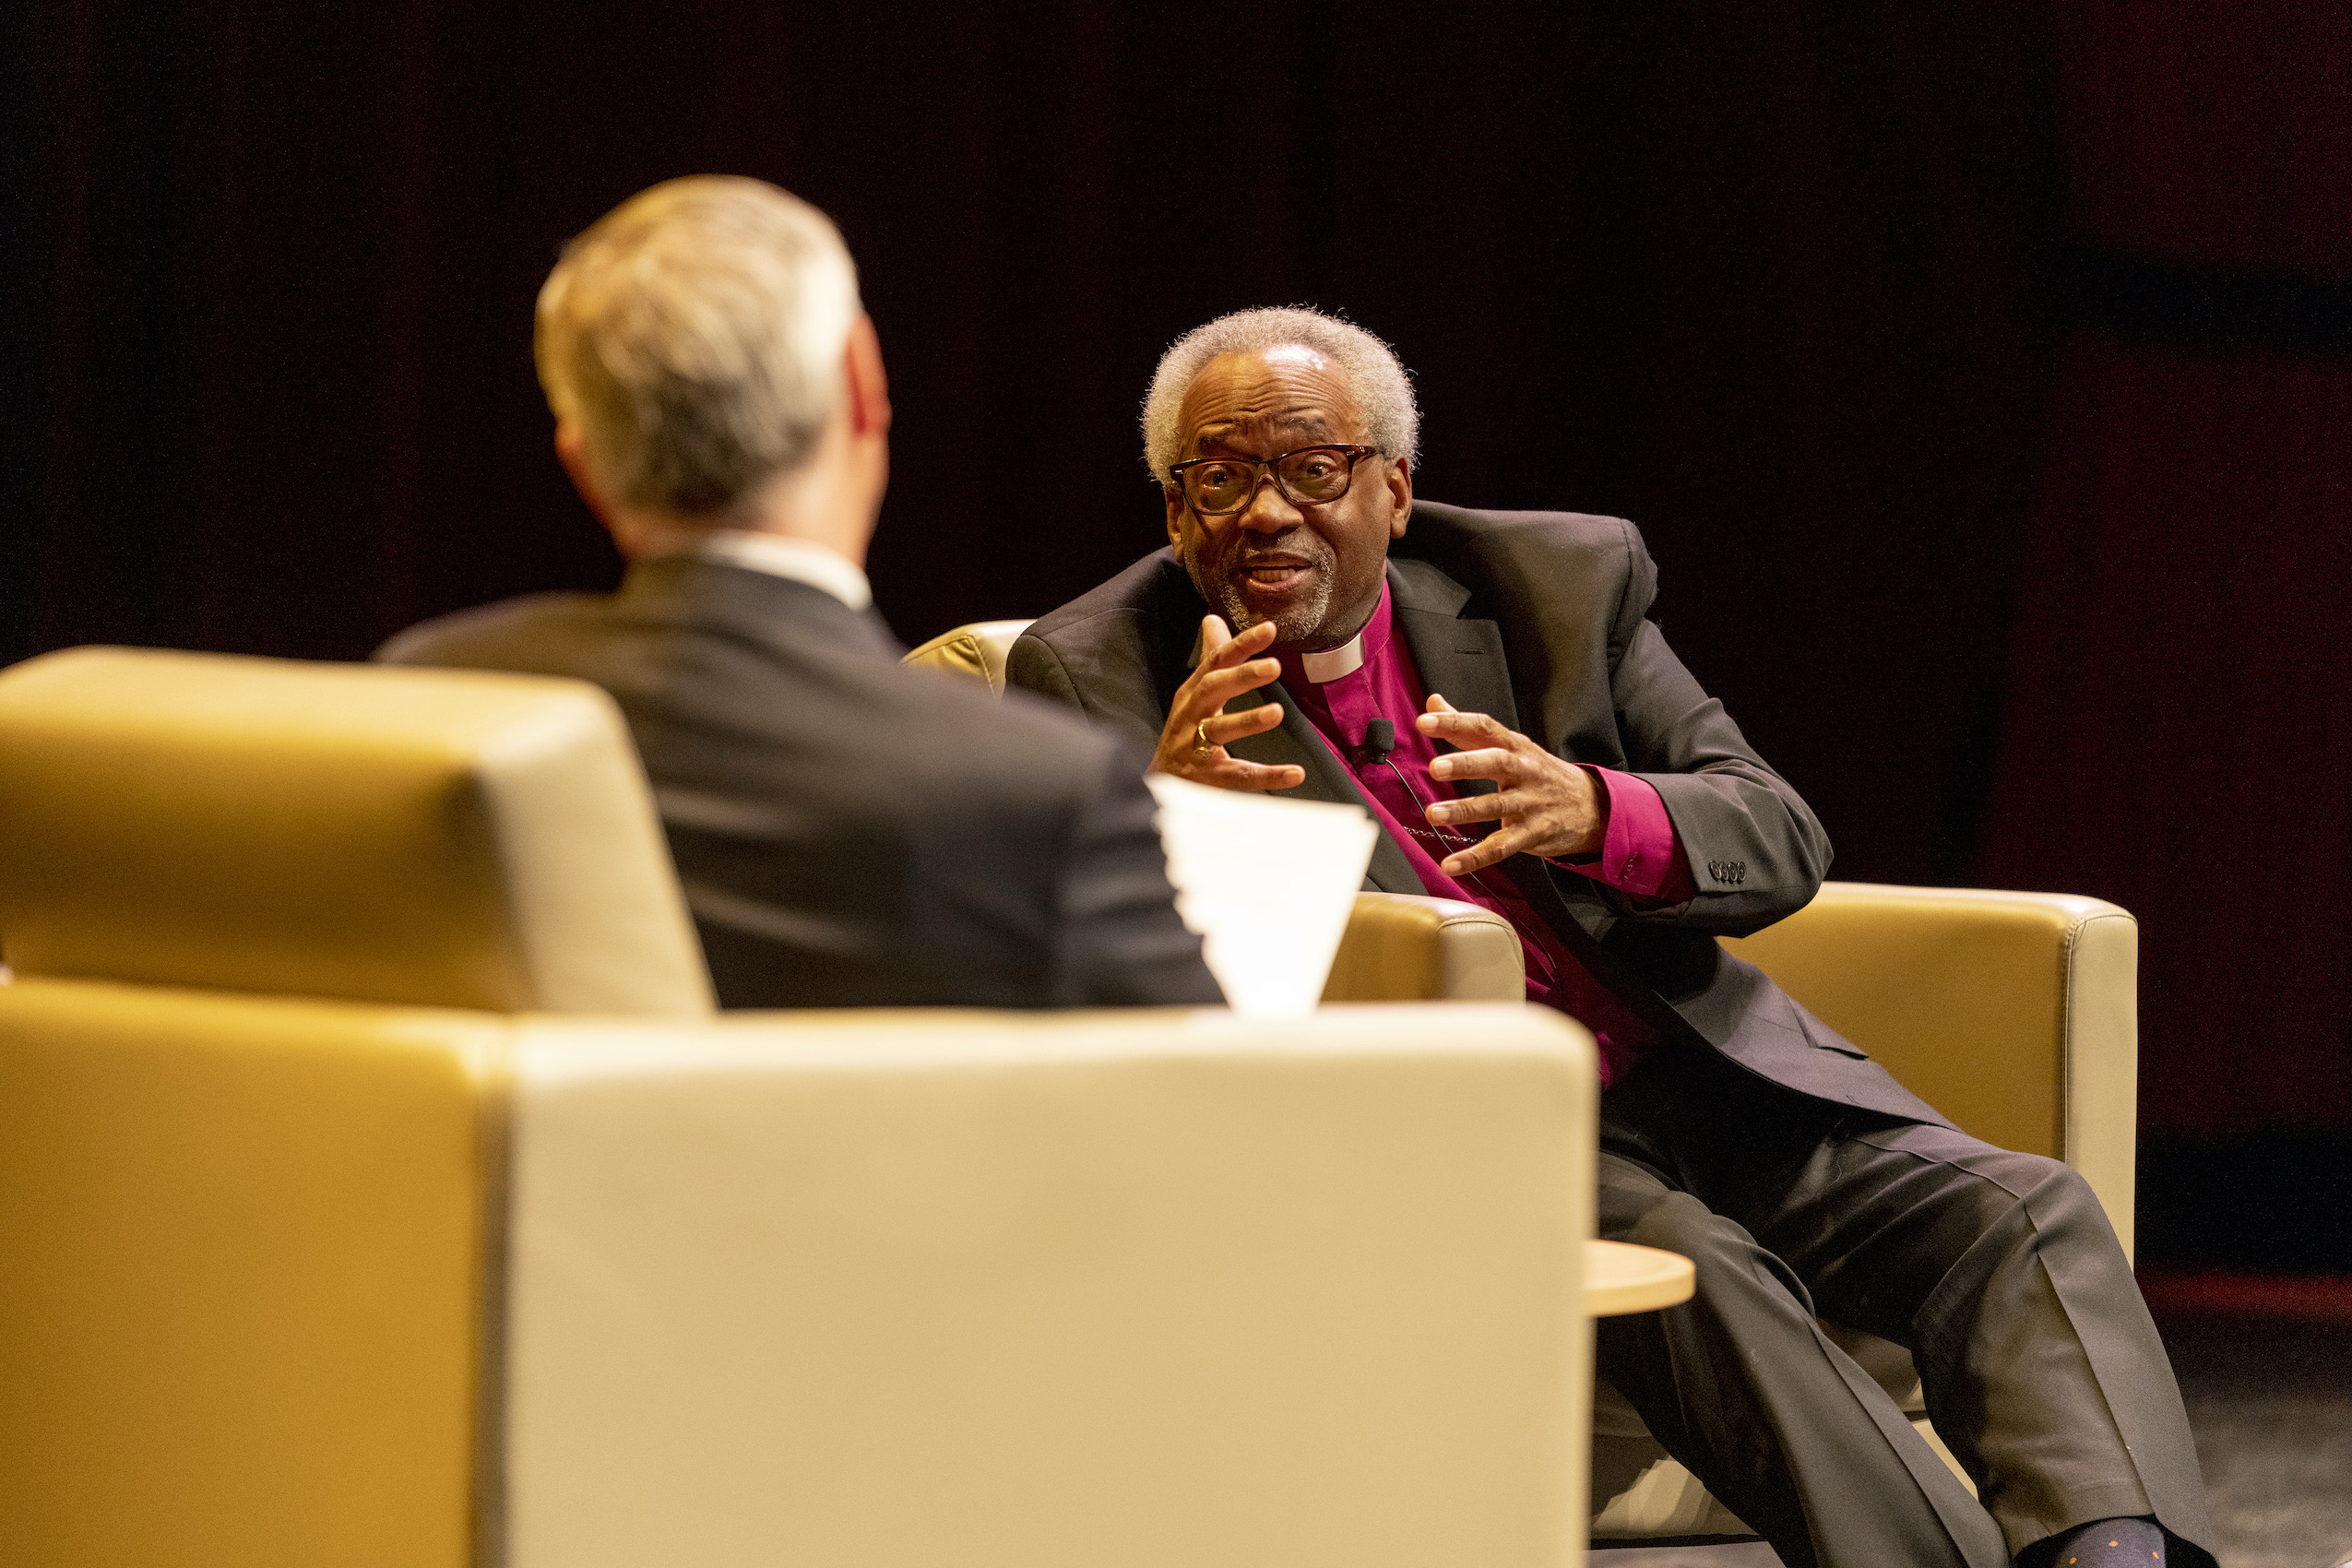 WATCH: Bishop Michael Bruce Curry and Jon Meacham call for positive change in discussion of religion, politics